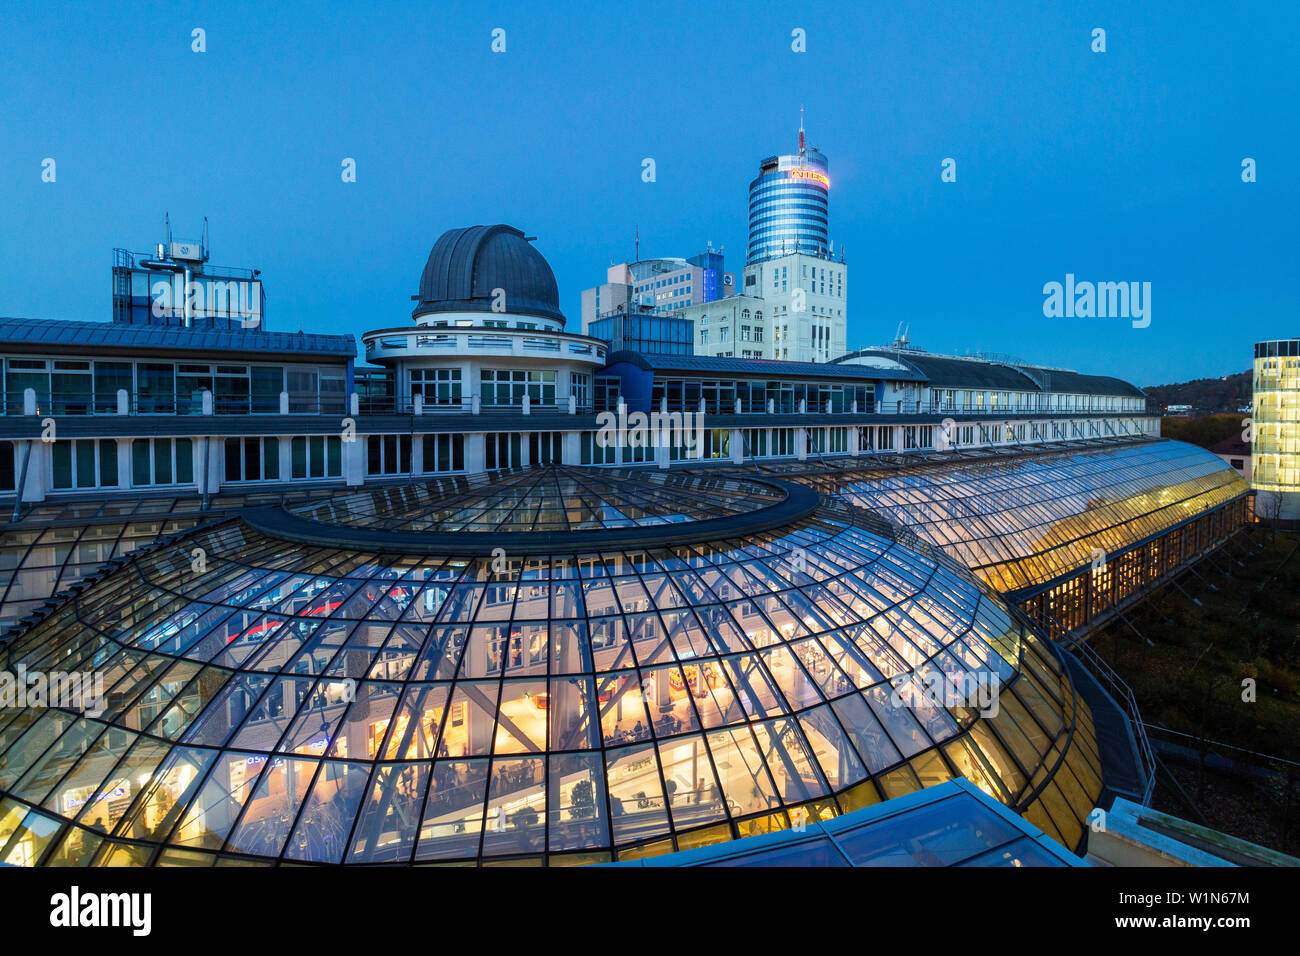 Goethe Gallery at dusk with observatory, Jentower in the background, Jena, Thuringia, Germany, Europe Stock Photo